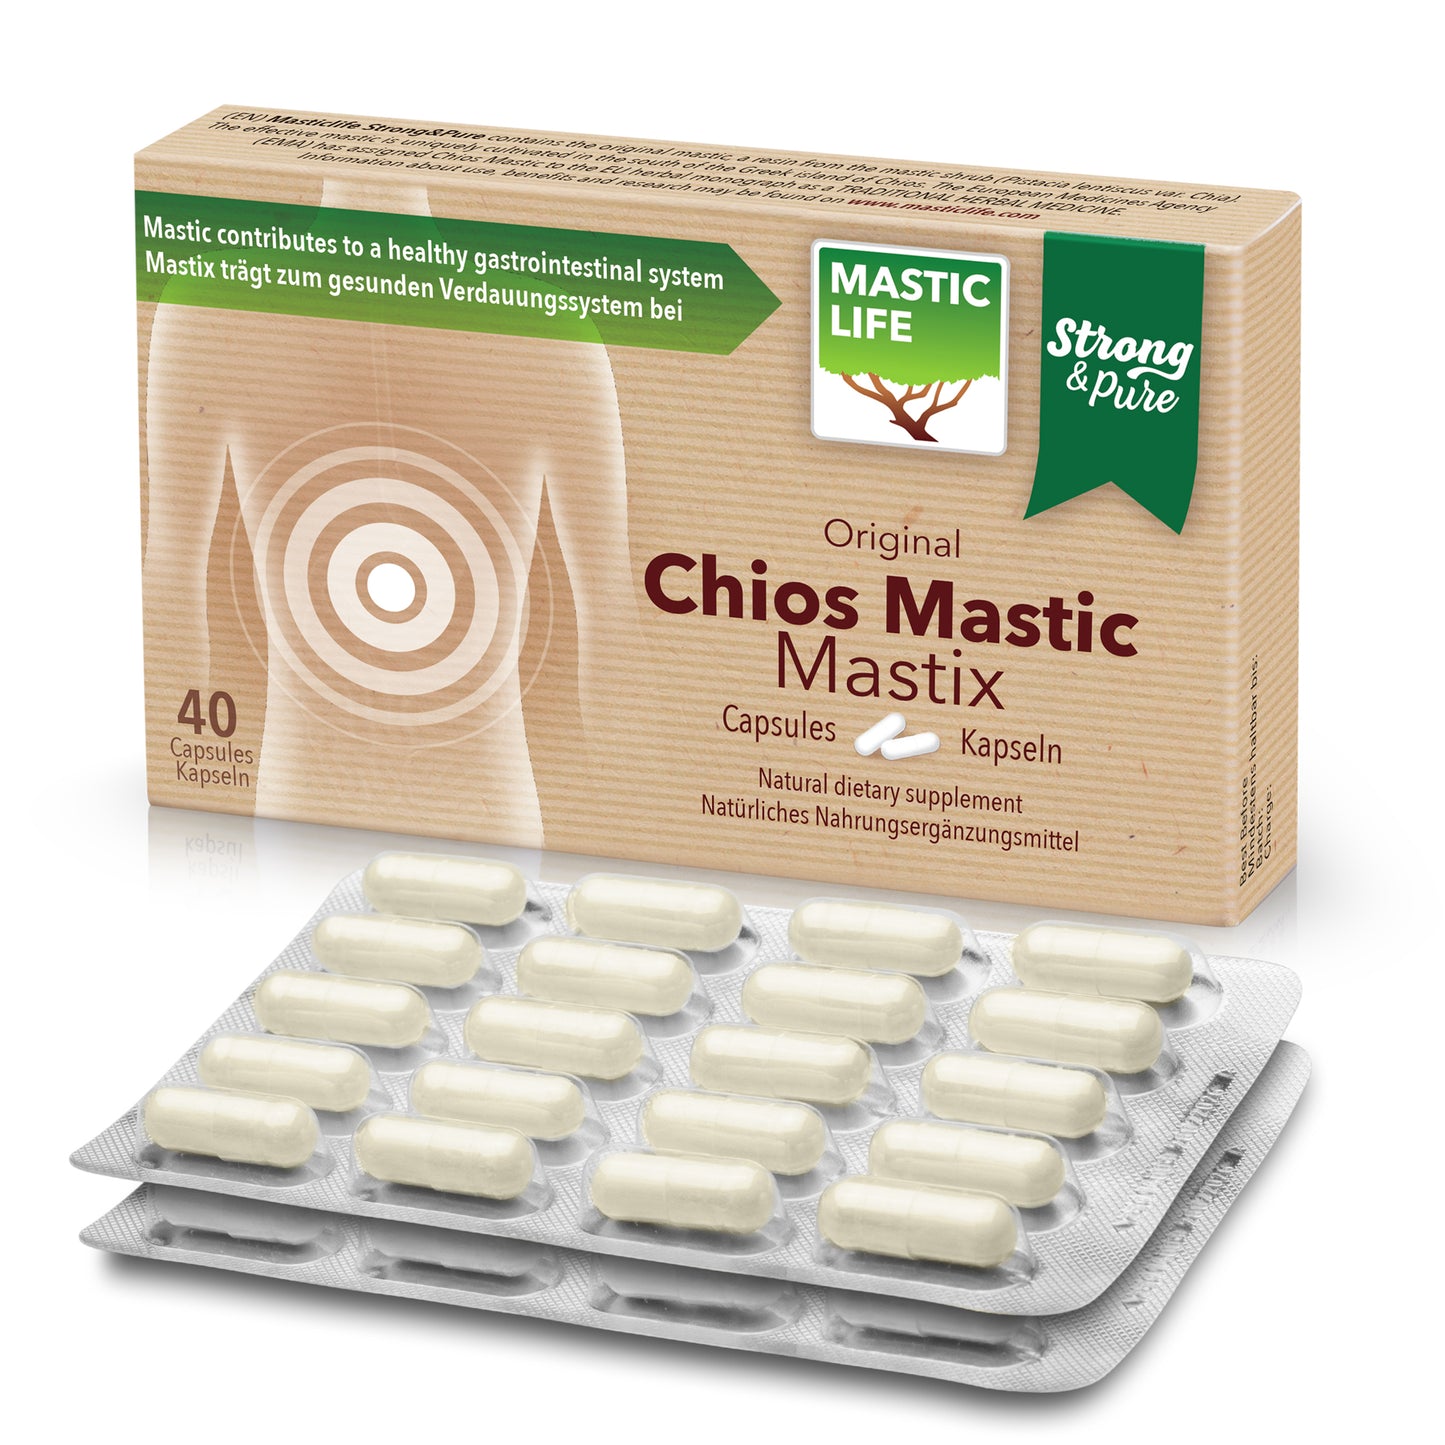 Mastic Strong&Pure (40 Capsules) Masticlife